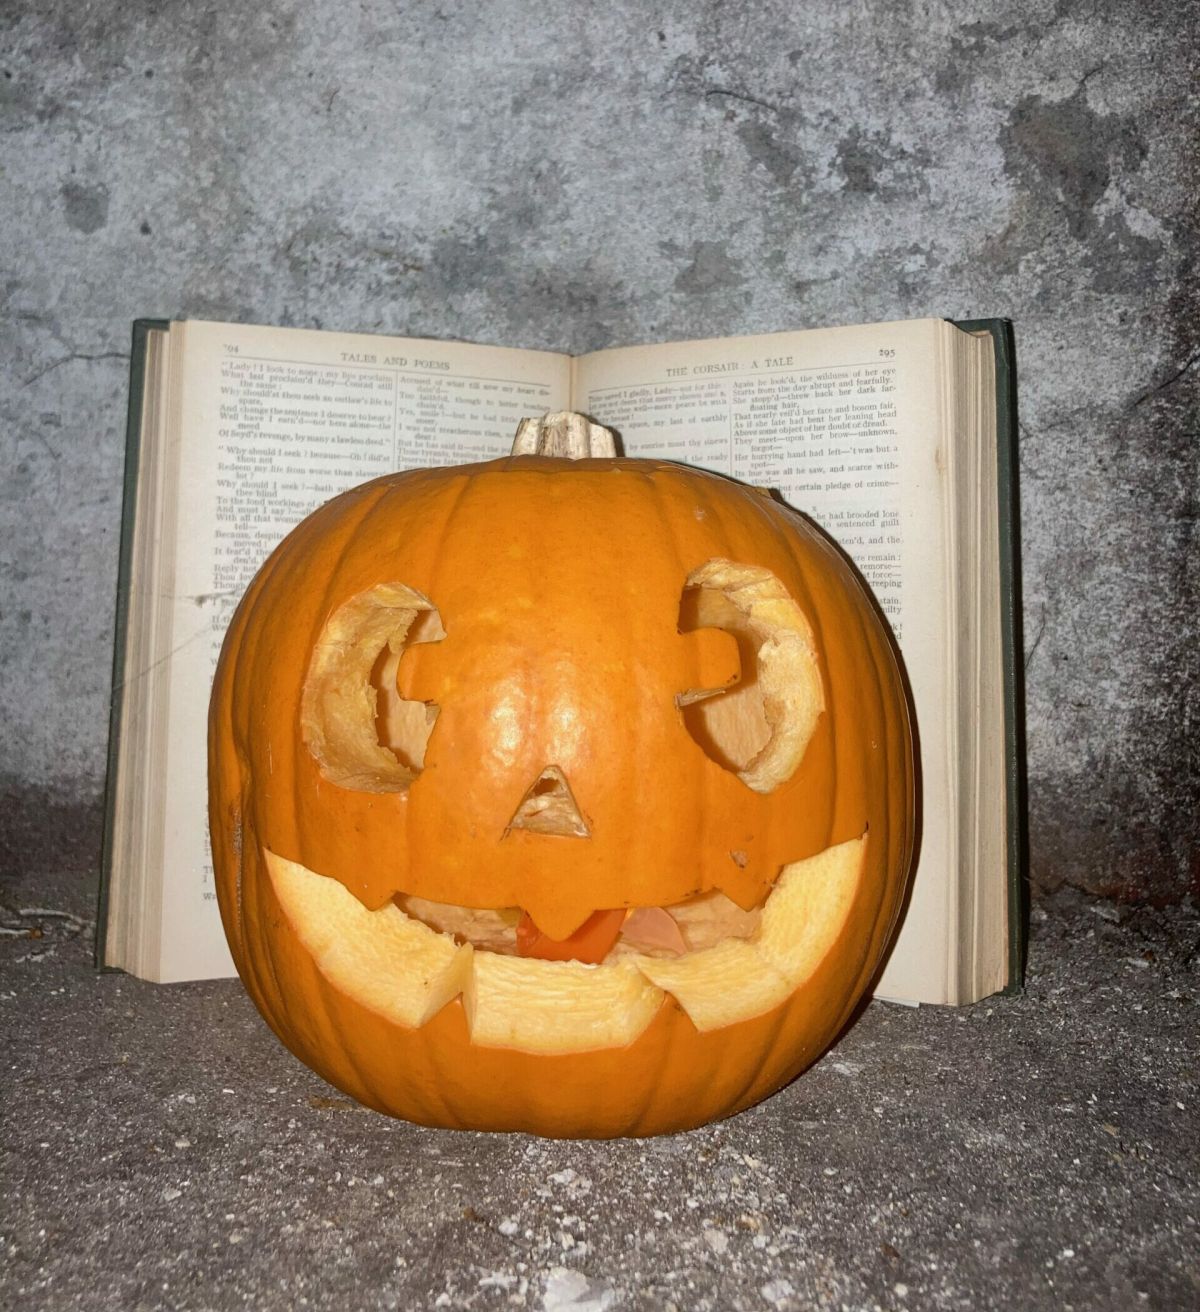 The Booooks section’s favourite spooky tales